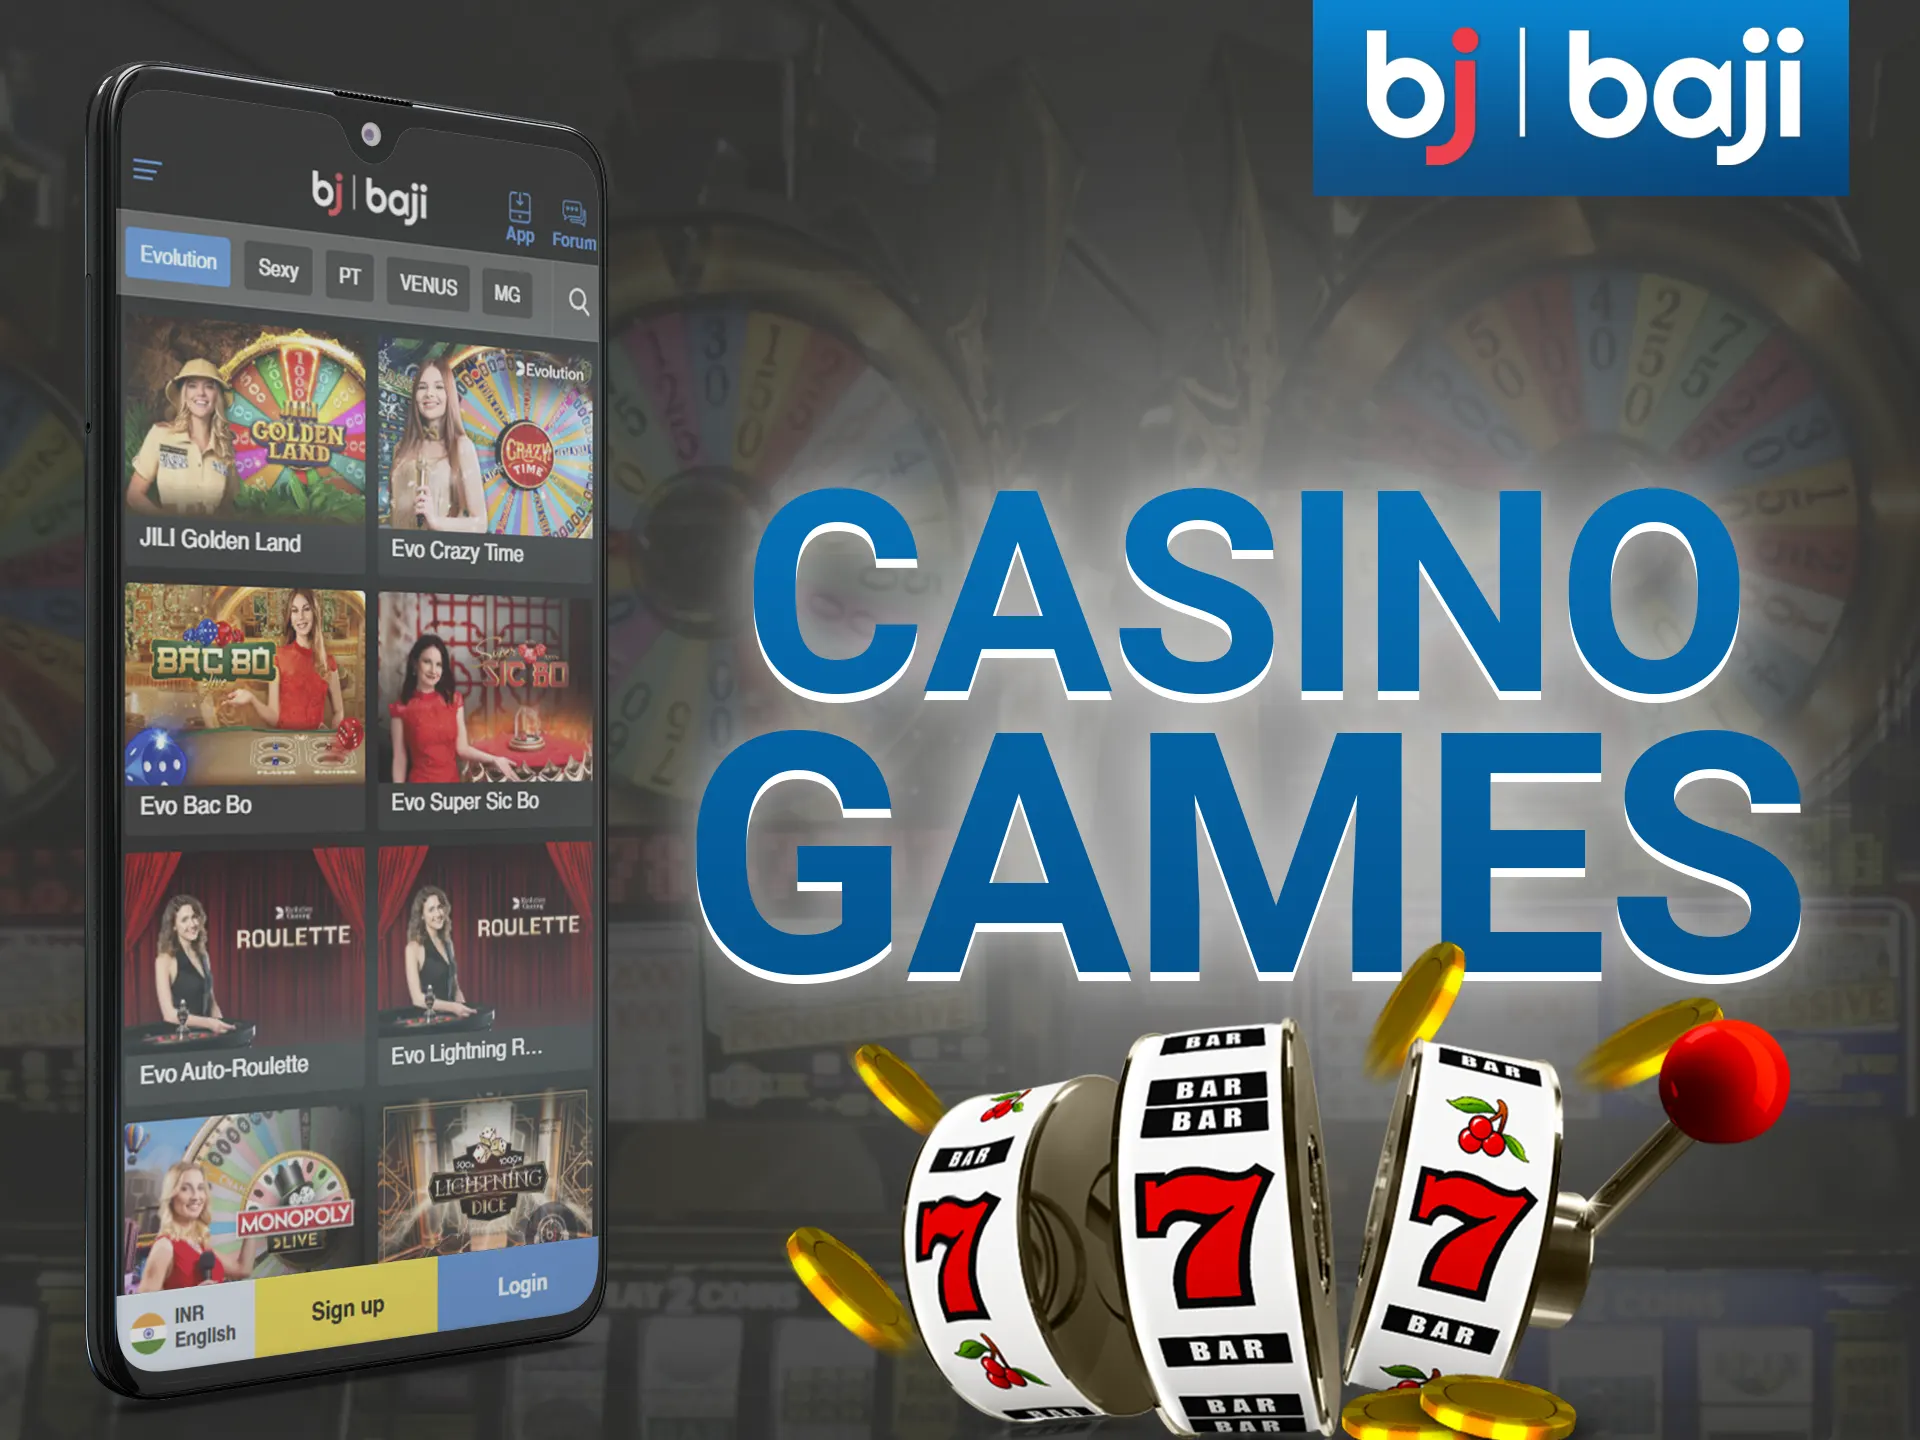 In Baji Live app, play a variety of casino games.